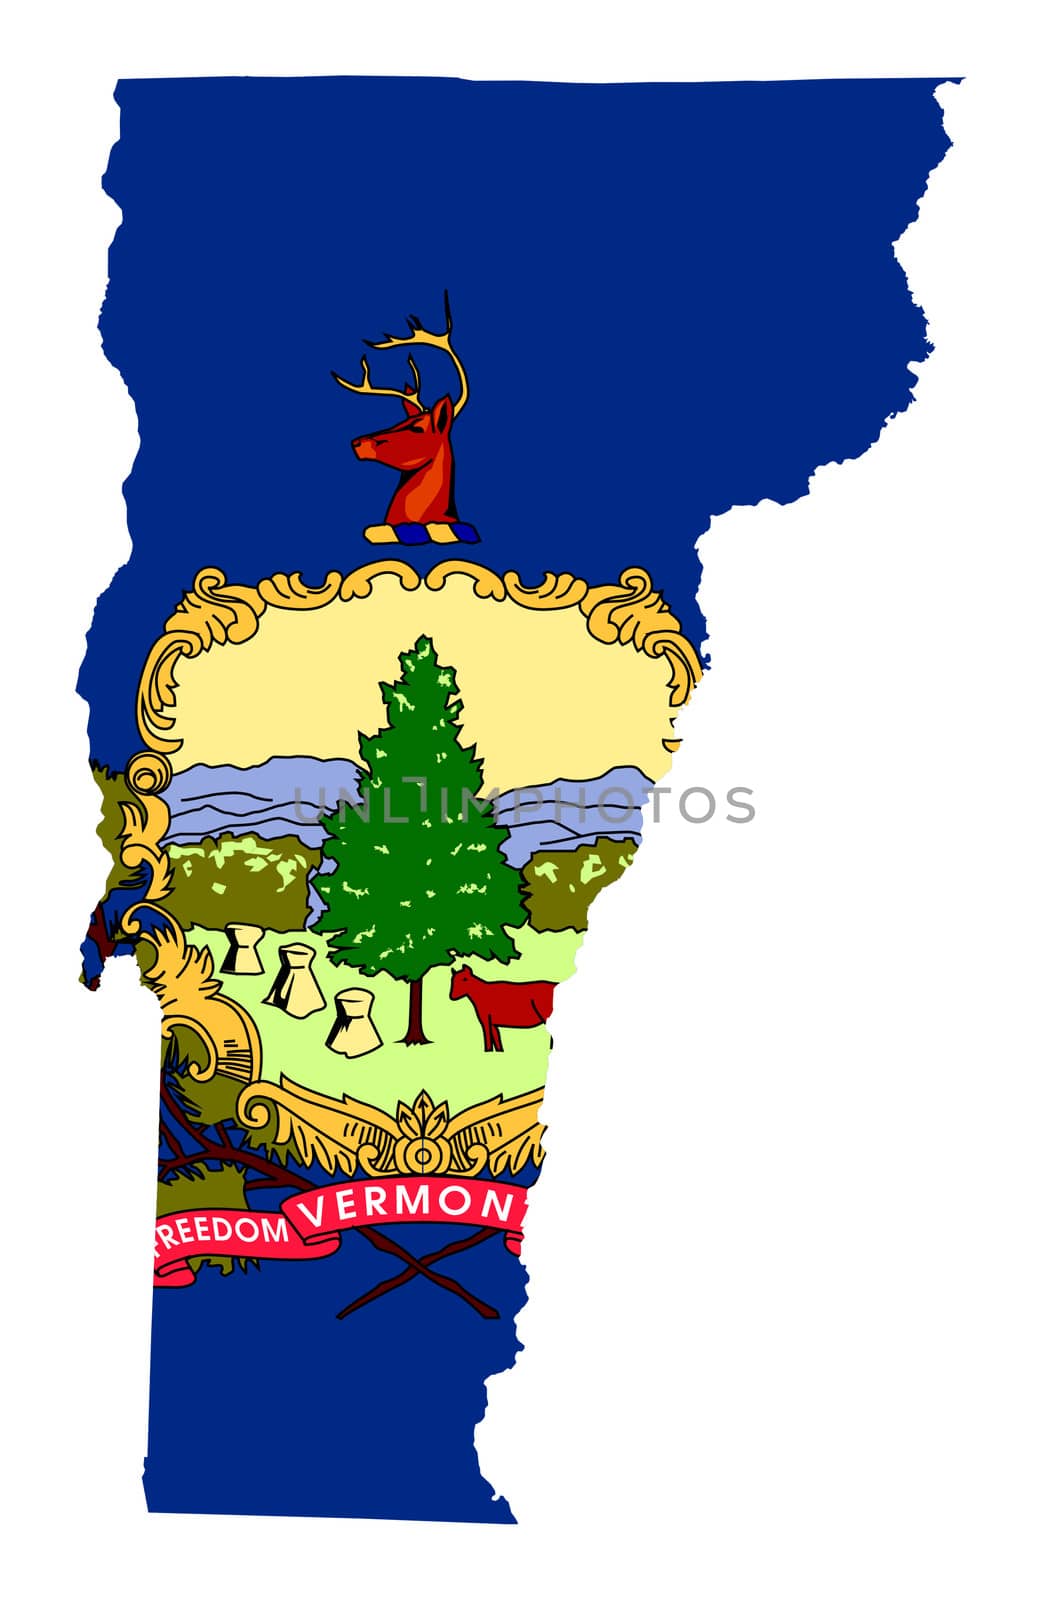 State of Vermont flag map isolated on a white background, U.S.A.